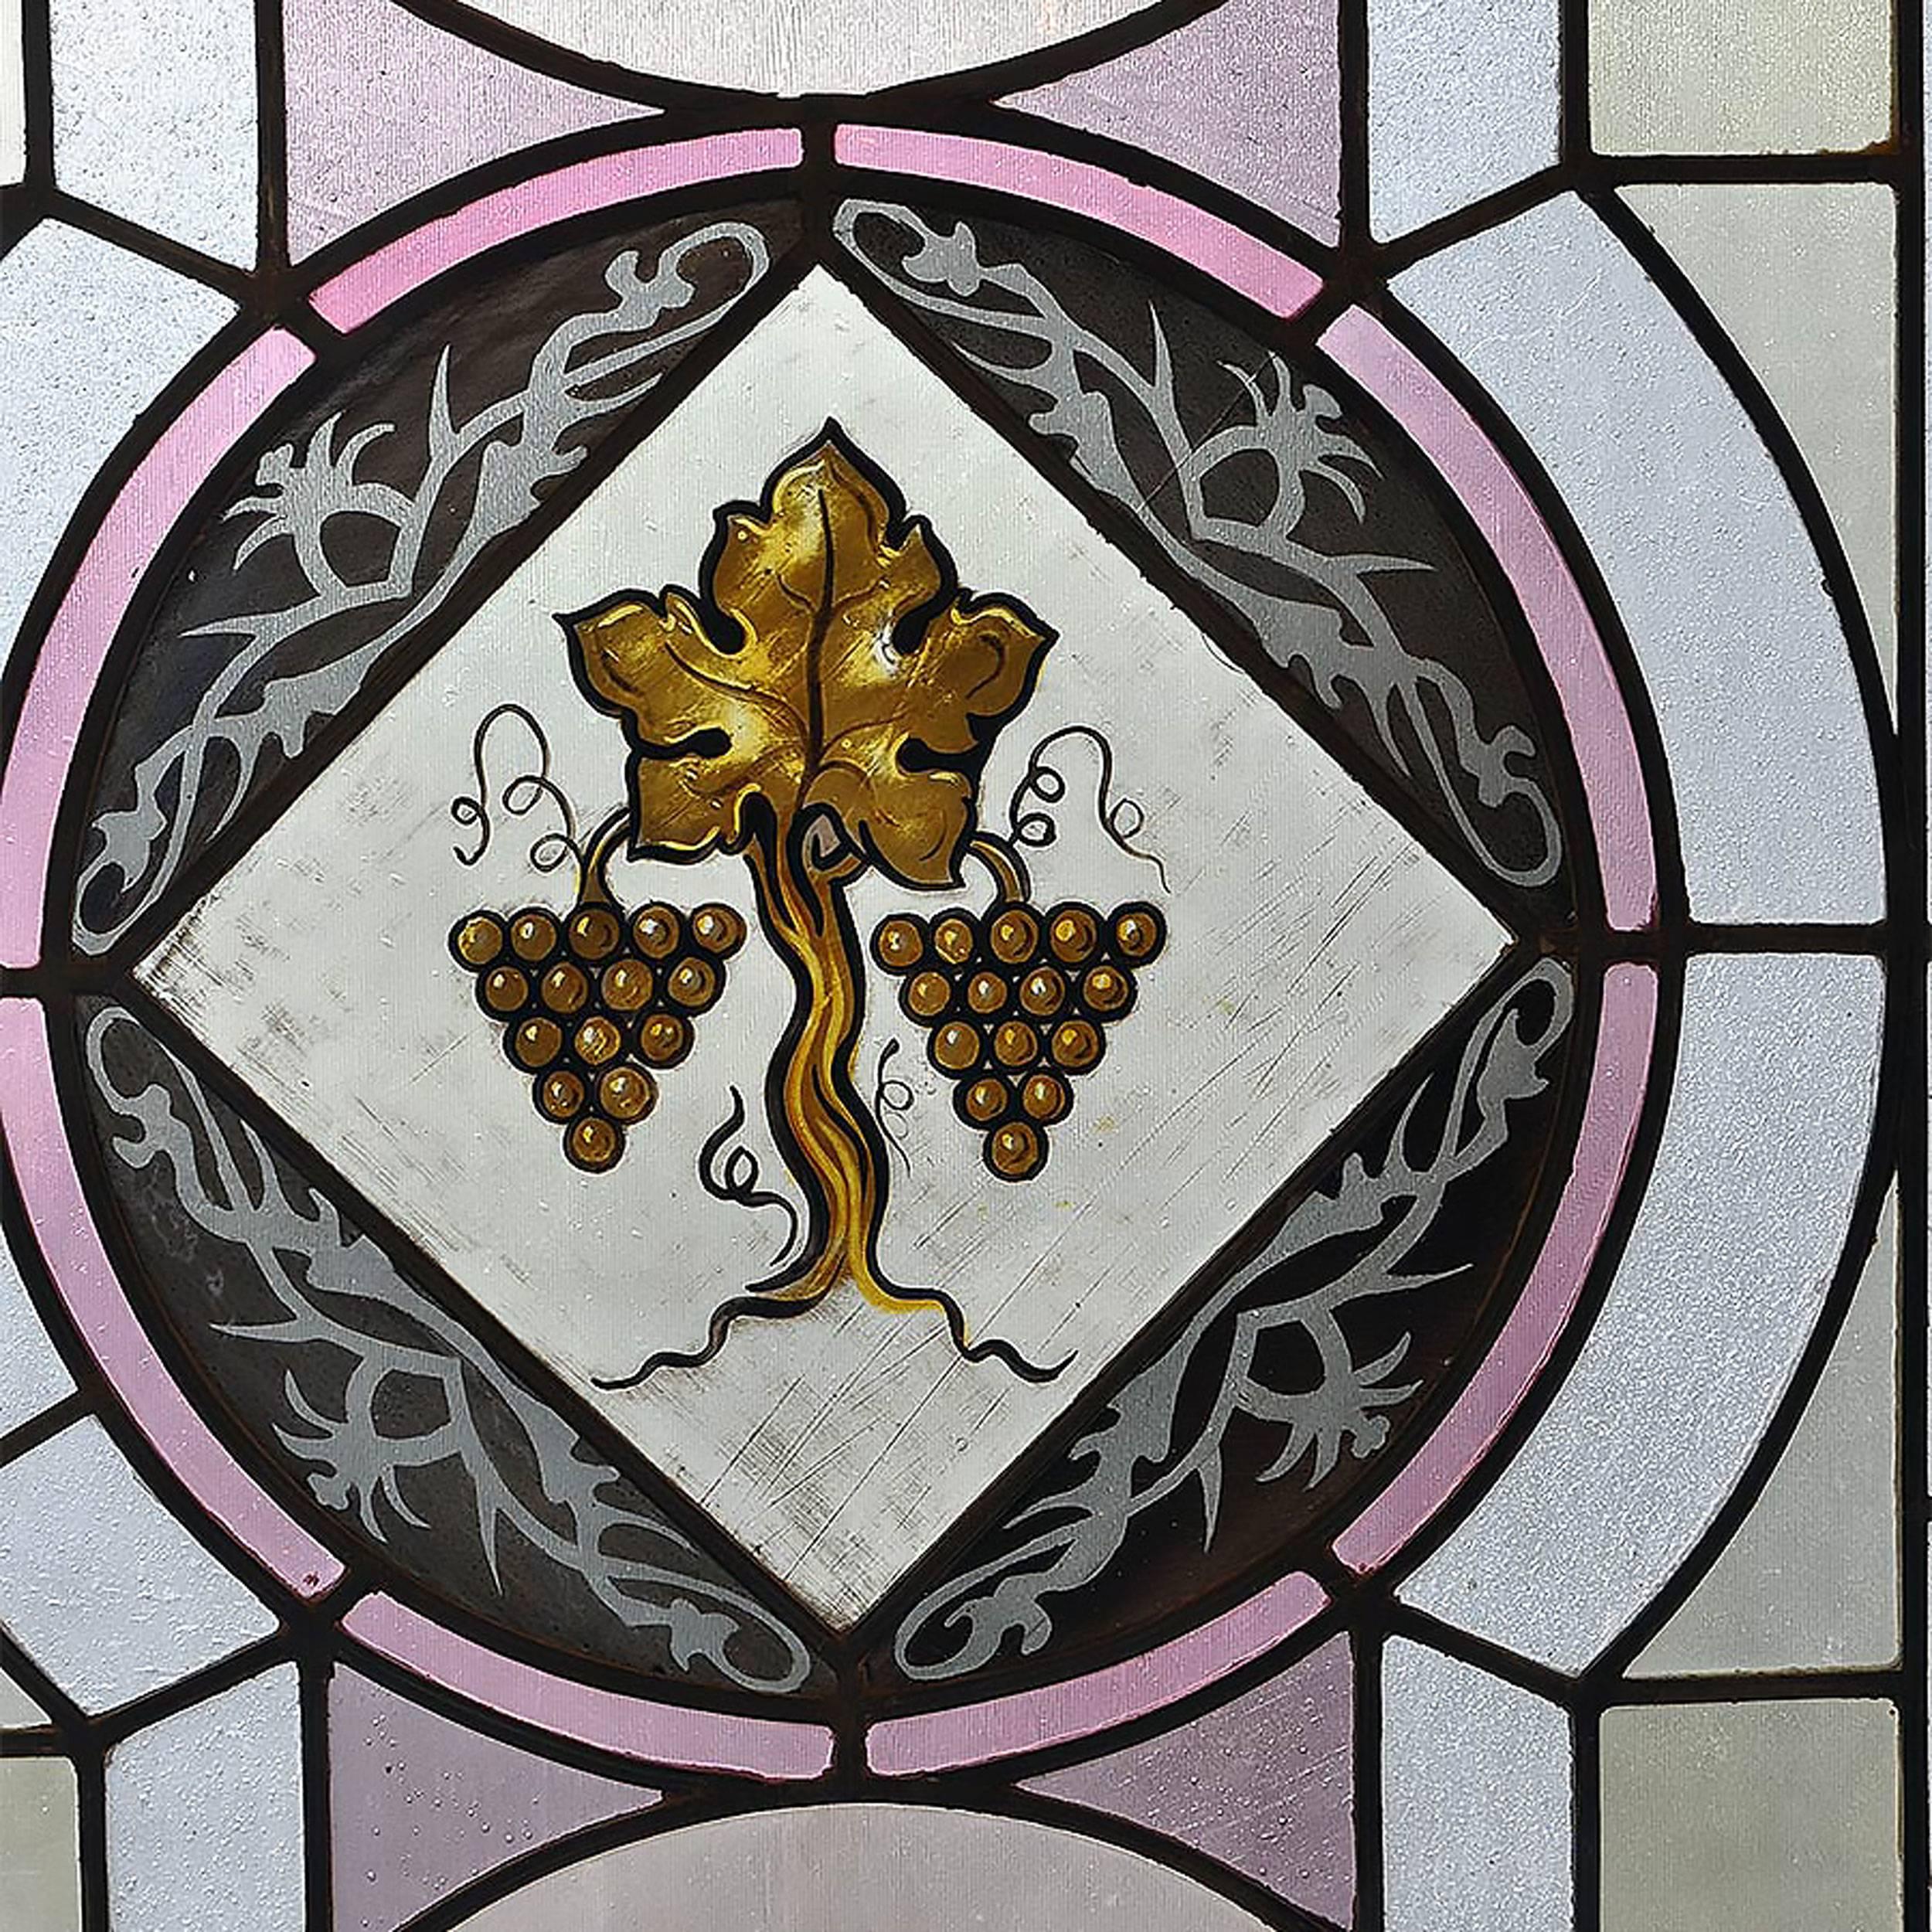 Gothic windows with hand-painted emblems and stained glass in a variety of pastel colors. These windows are complete in frames and there are four different sizes available with a variety of designs. Please contact us if you are interested in more